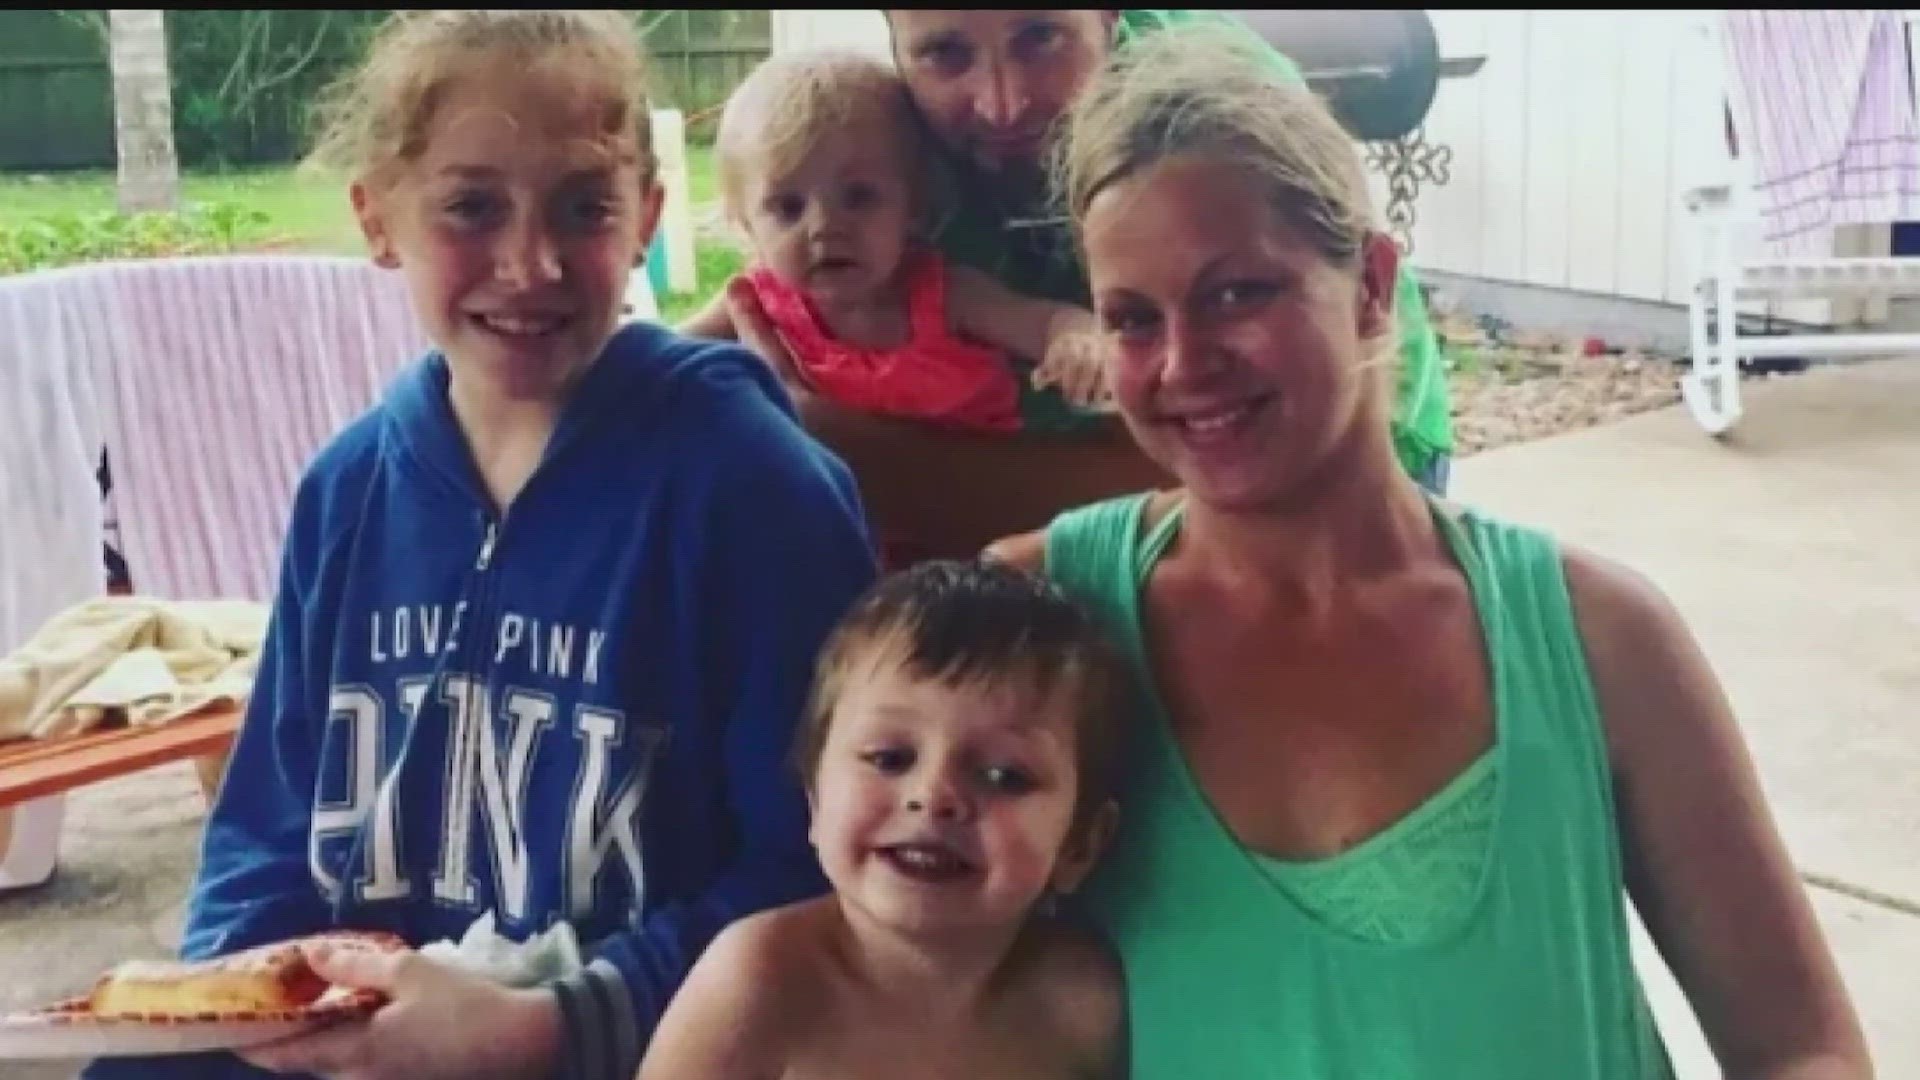 Brittney Cockrell, 37, and Michael Hayter, 41, had recently moved to Westbrook, Maine with their children.